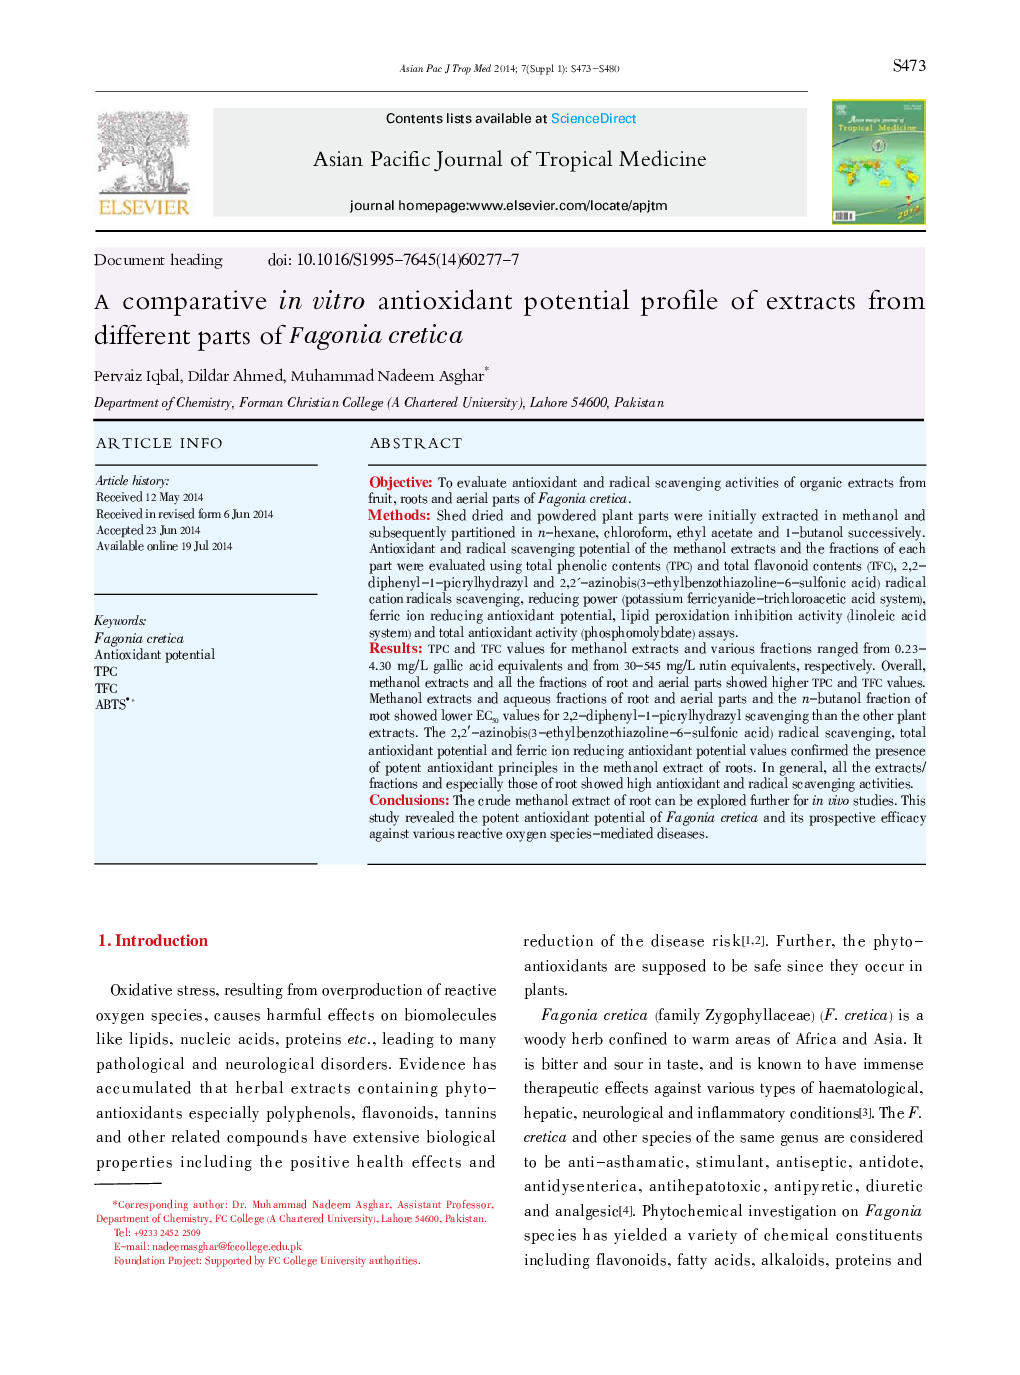 A comparative in vitro antioxidant potential profile of extracts from different parts of Fagonia cretica 